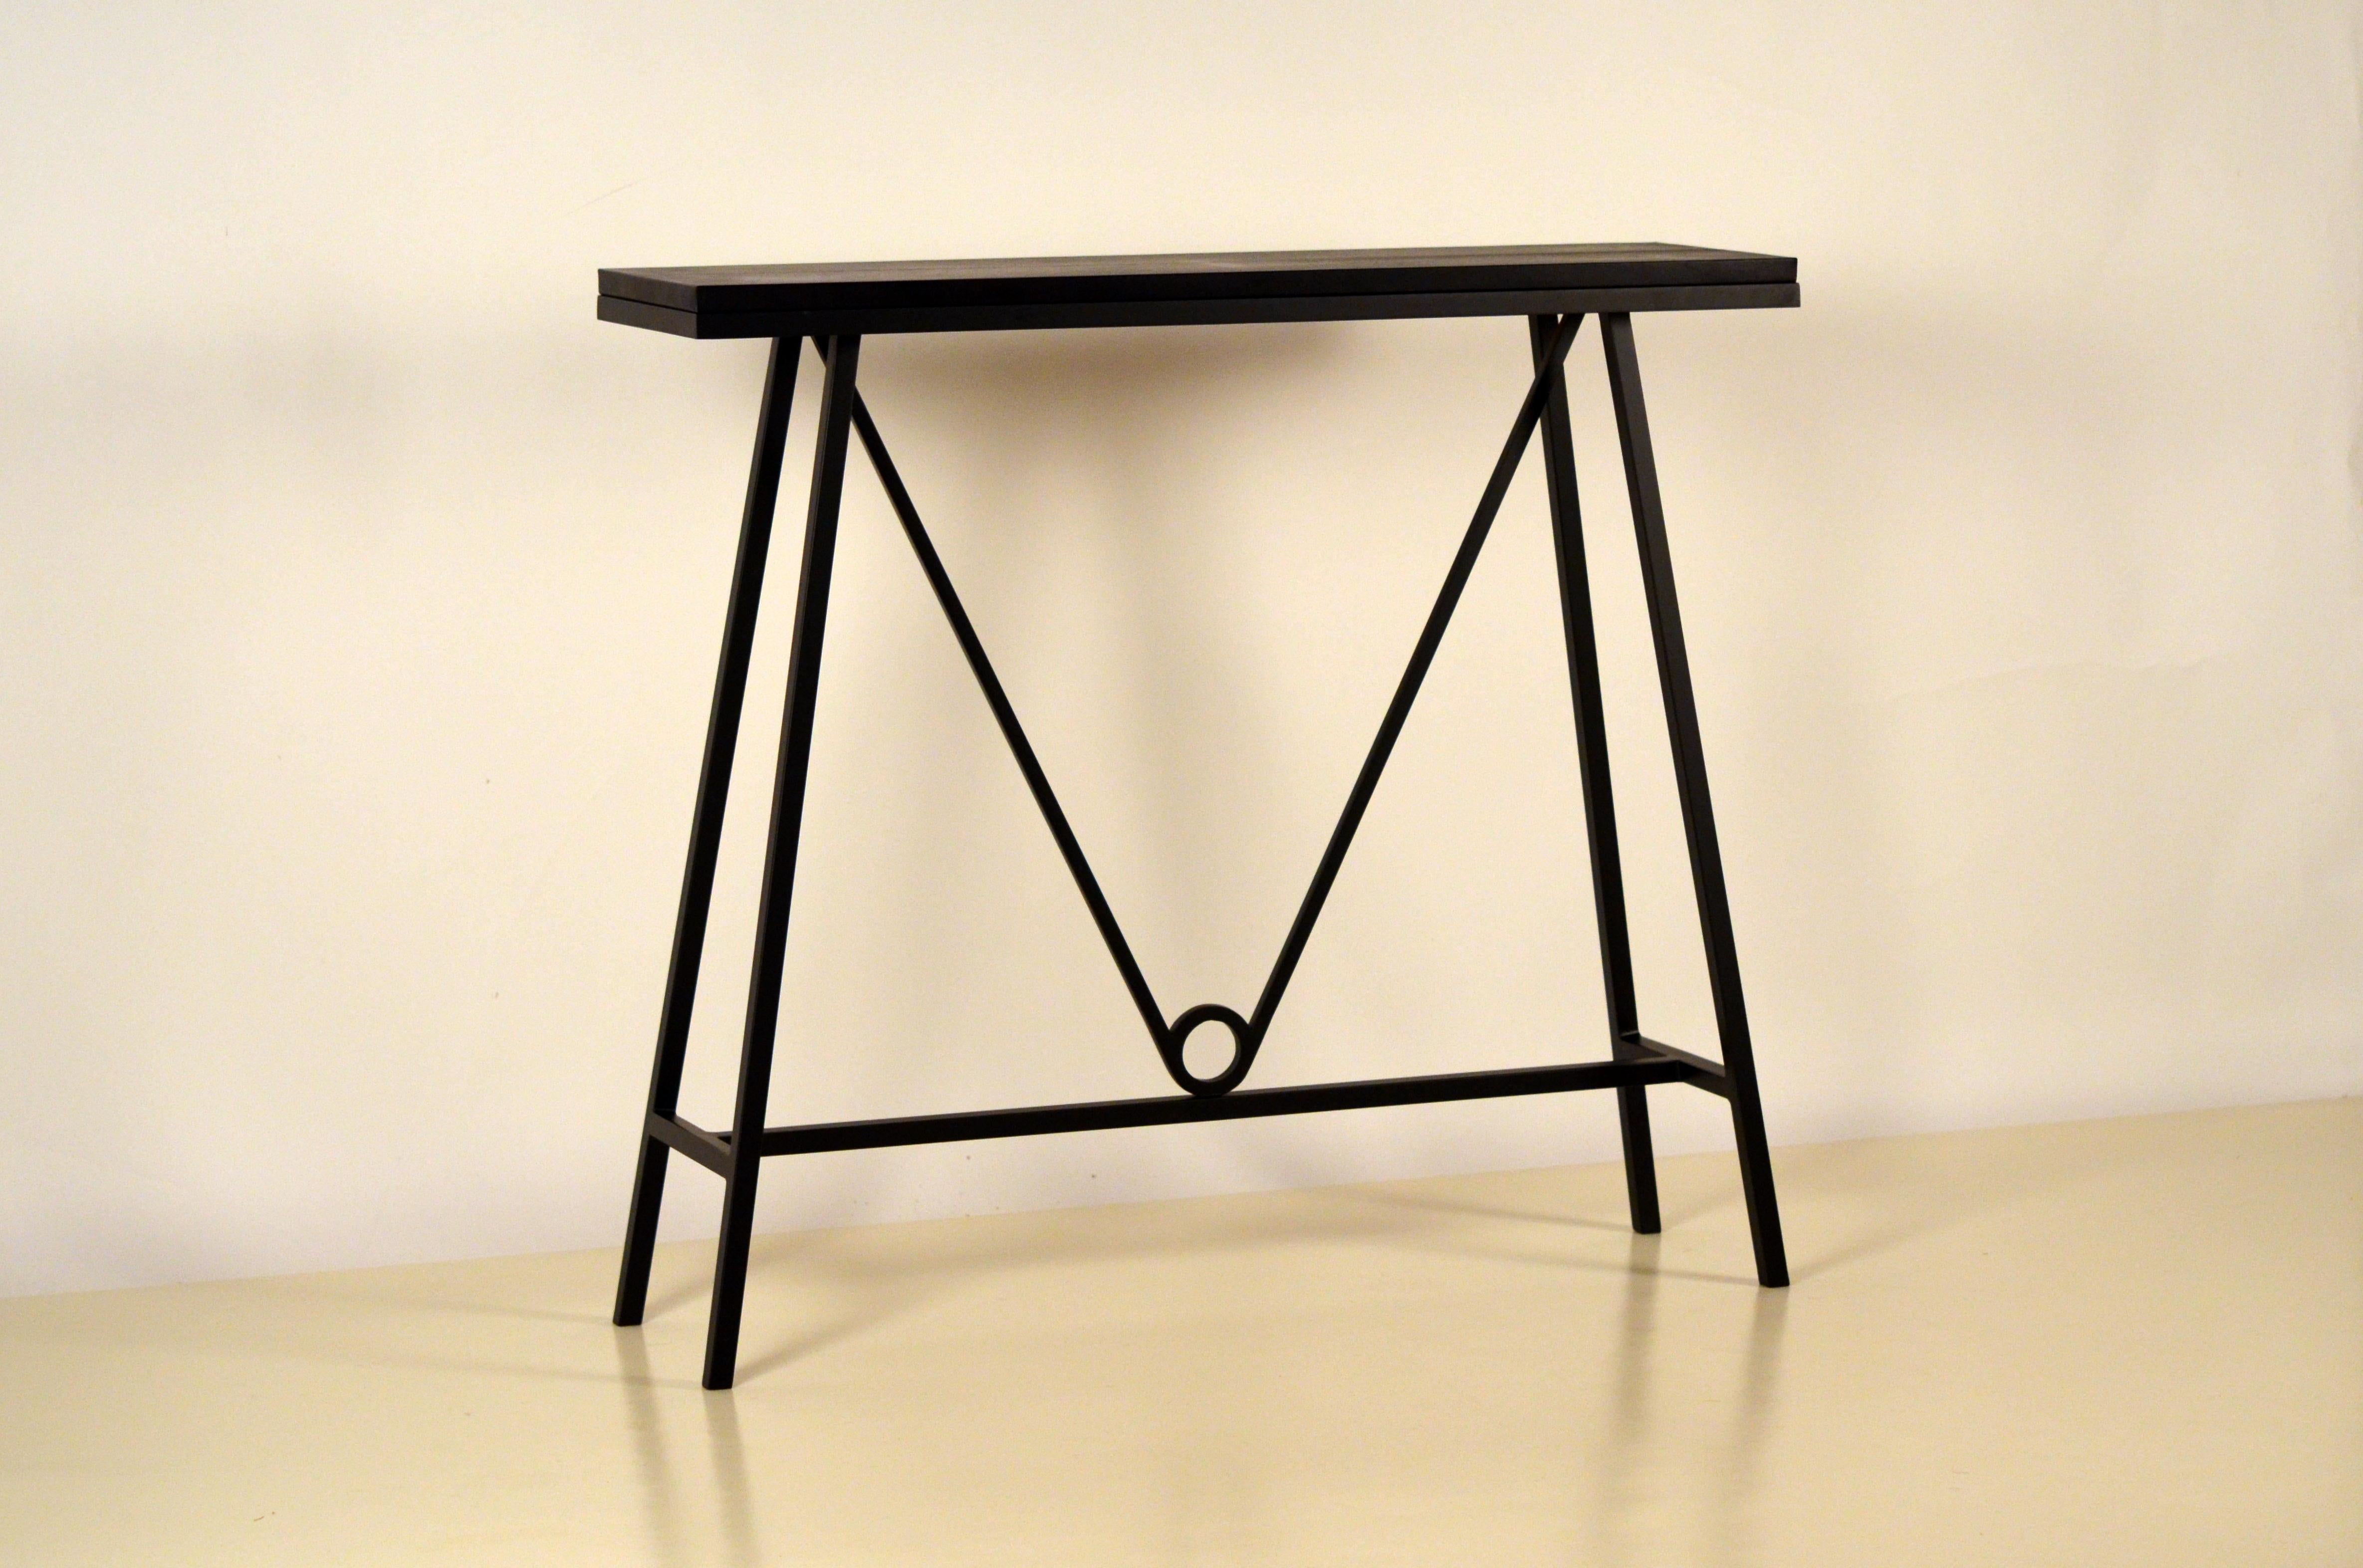 'Trapèze' blackened steel and goatskin console by Design Frères.